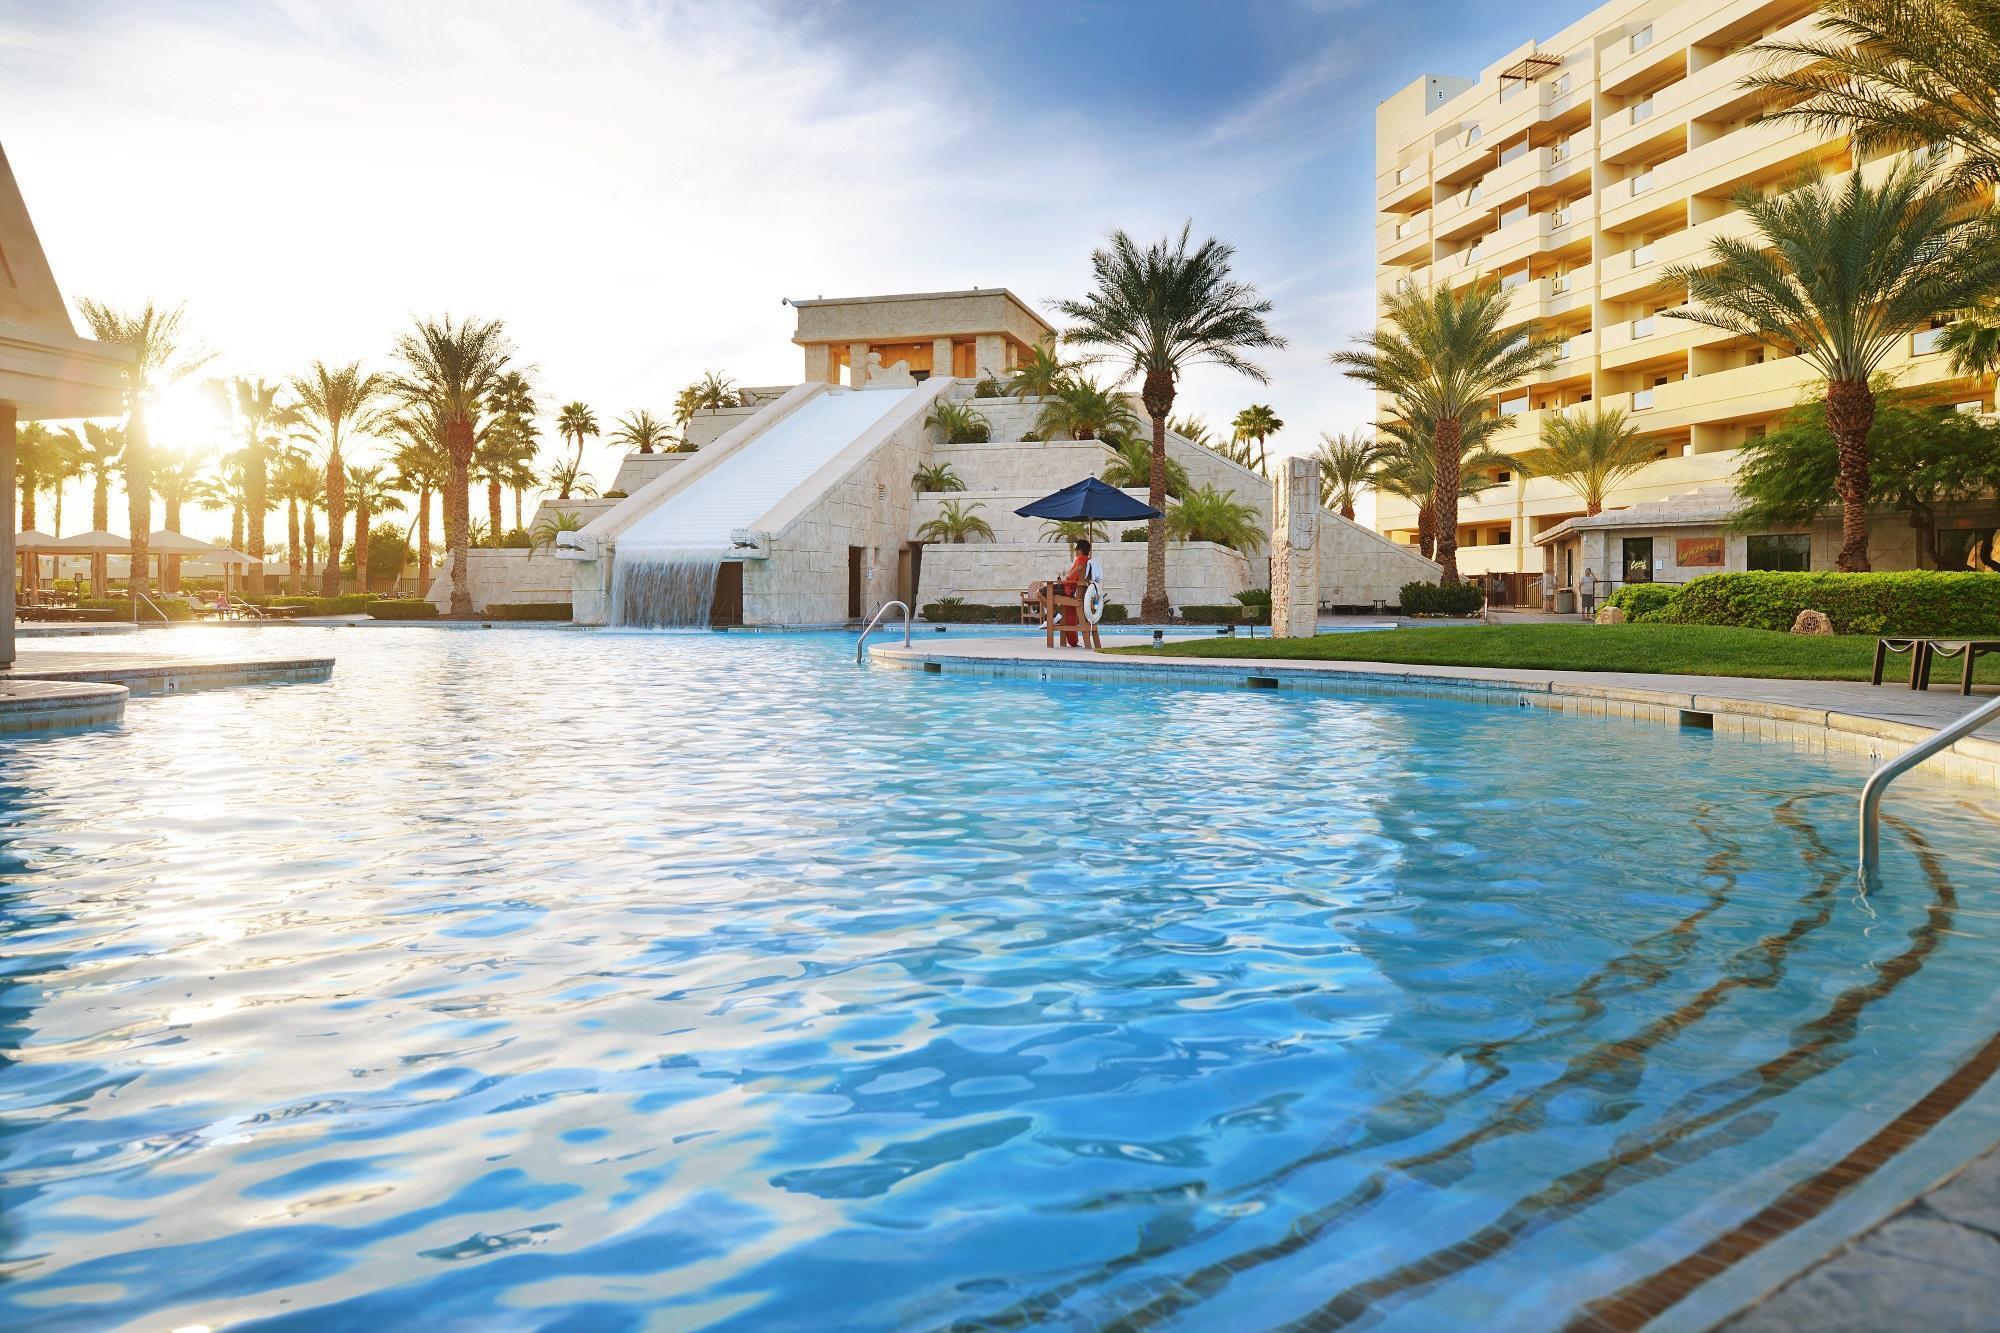 HOTEL HILTON VACATION CLUB CANCUN RESORT LAS VEGAS, NV 3* (United States) -  from US$ 107 | BOOKED